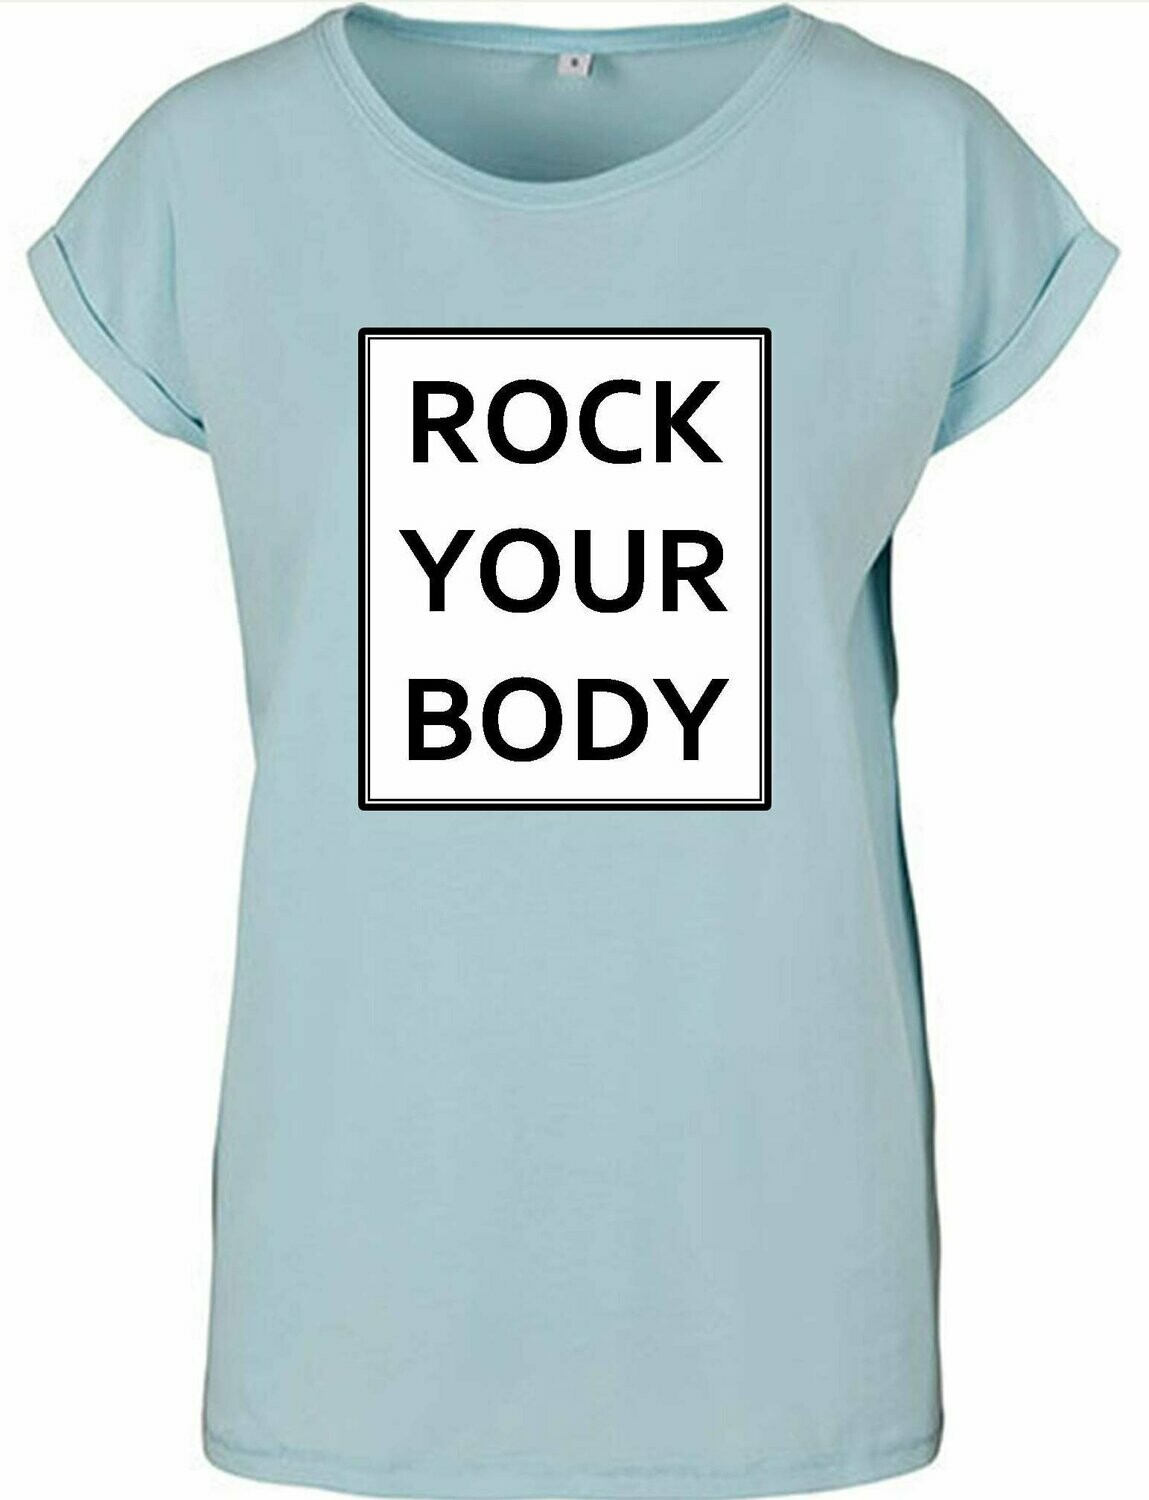 Extended Shoulder Tee "ROCK YOUR BODY"